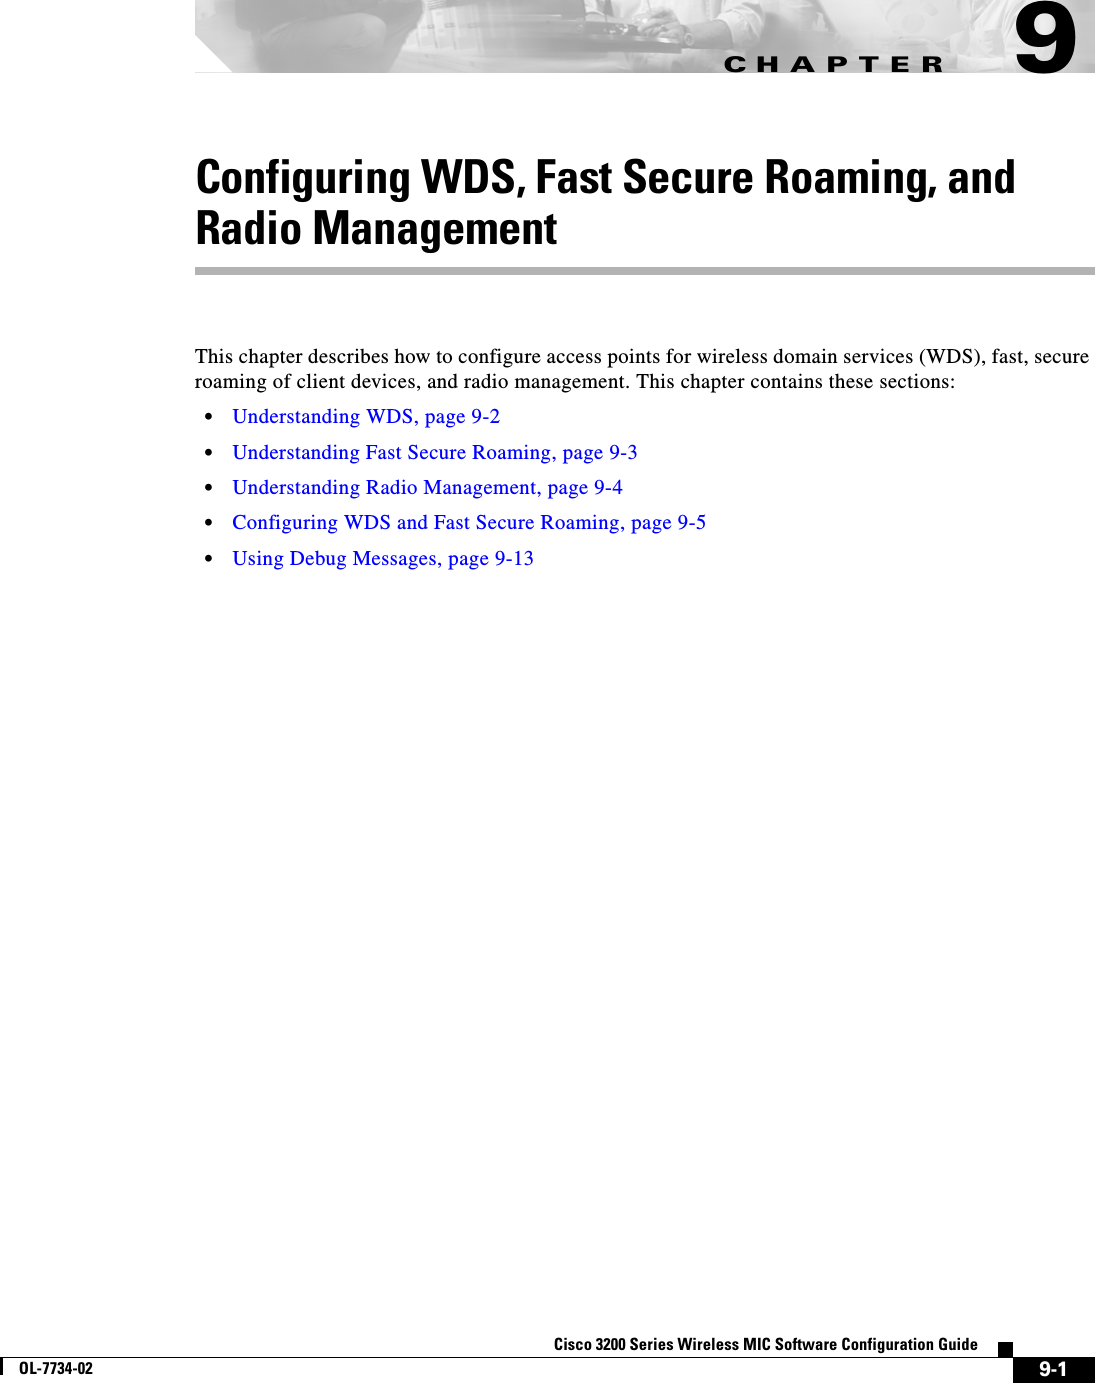 CHAPTER9-1Cisco 3200 Series Wireless MIC Software Configuration GuideOL-7734-029Configuring WDS, Fast Secure Roaming, and Radio ManagementThis chapter describes how to configure access points for wireless domain services (WDS), fast, secure roaming of client devices, and radio management. This chapter contains these sections:•Understanding WDS, page 9-2•Understanding Fast Secure Roaming, page 9-3•Understanding Radio Management, page 9-4•Configuring WDS and Fast Secure Roaming, page 9-5•Using Debug Messages, page 9-13